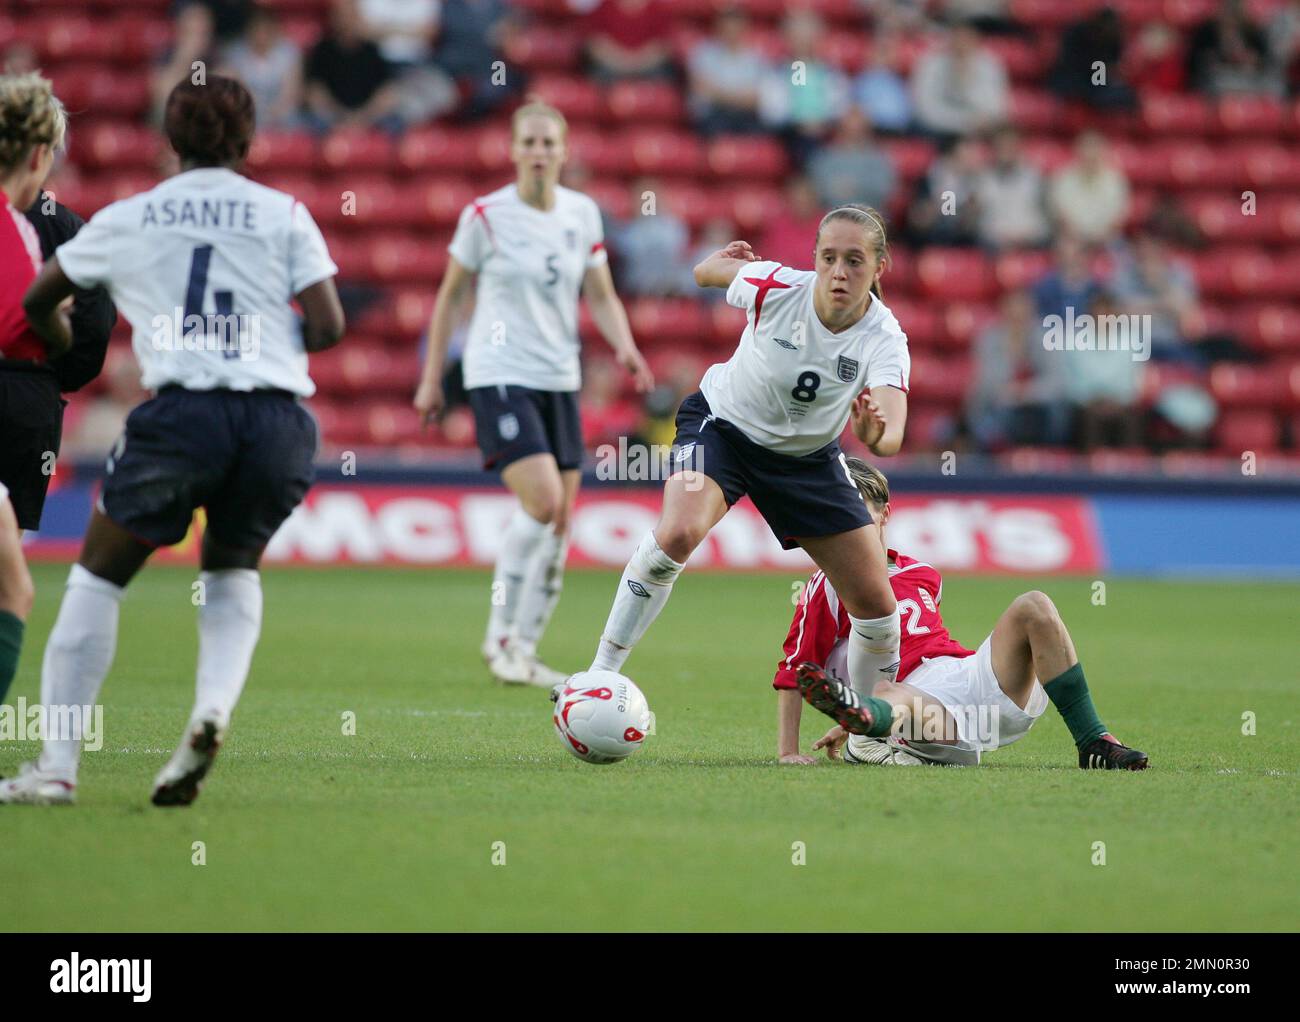 England v Hungary Women's football 2006 World Cup Qualifier  at St Marys stadium Southampton. Englands Josanne Potter in action.  image is bound by Dataco restrictions on how it can be used. EDITORIAL USE ONLY No use with unauthorised audio, video, data, fixture lists, club/league logos or “live” services. Online in-match use limited to 120 images, no video emulation. No use in betting, games or single club/league/player publications Stock Photo